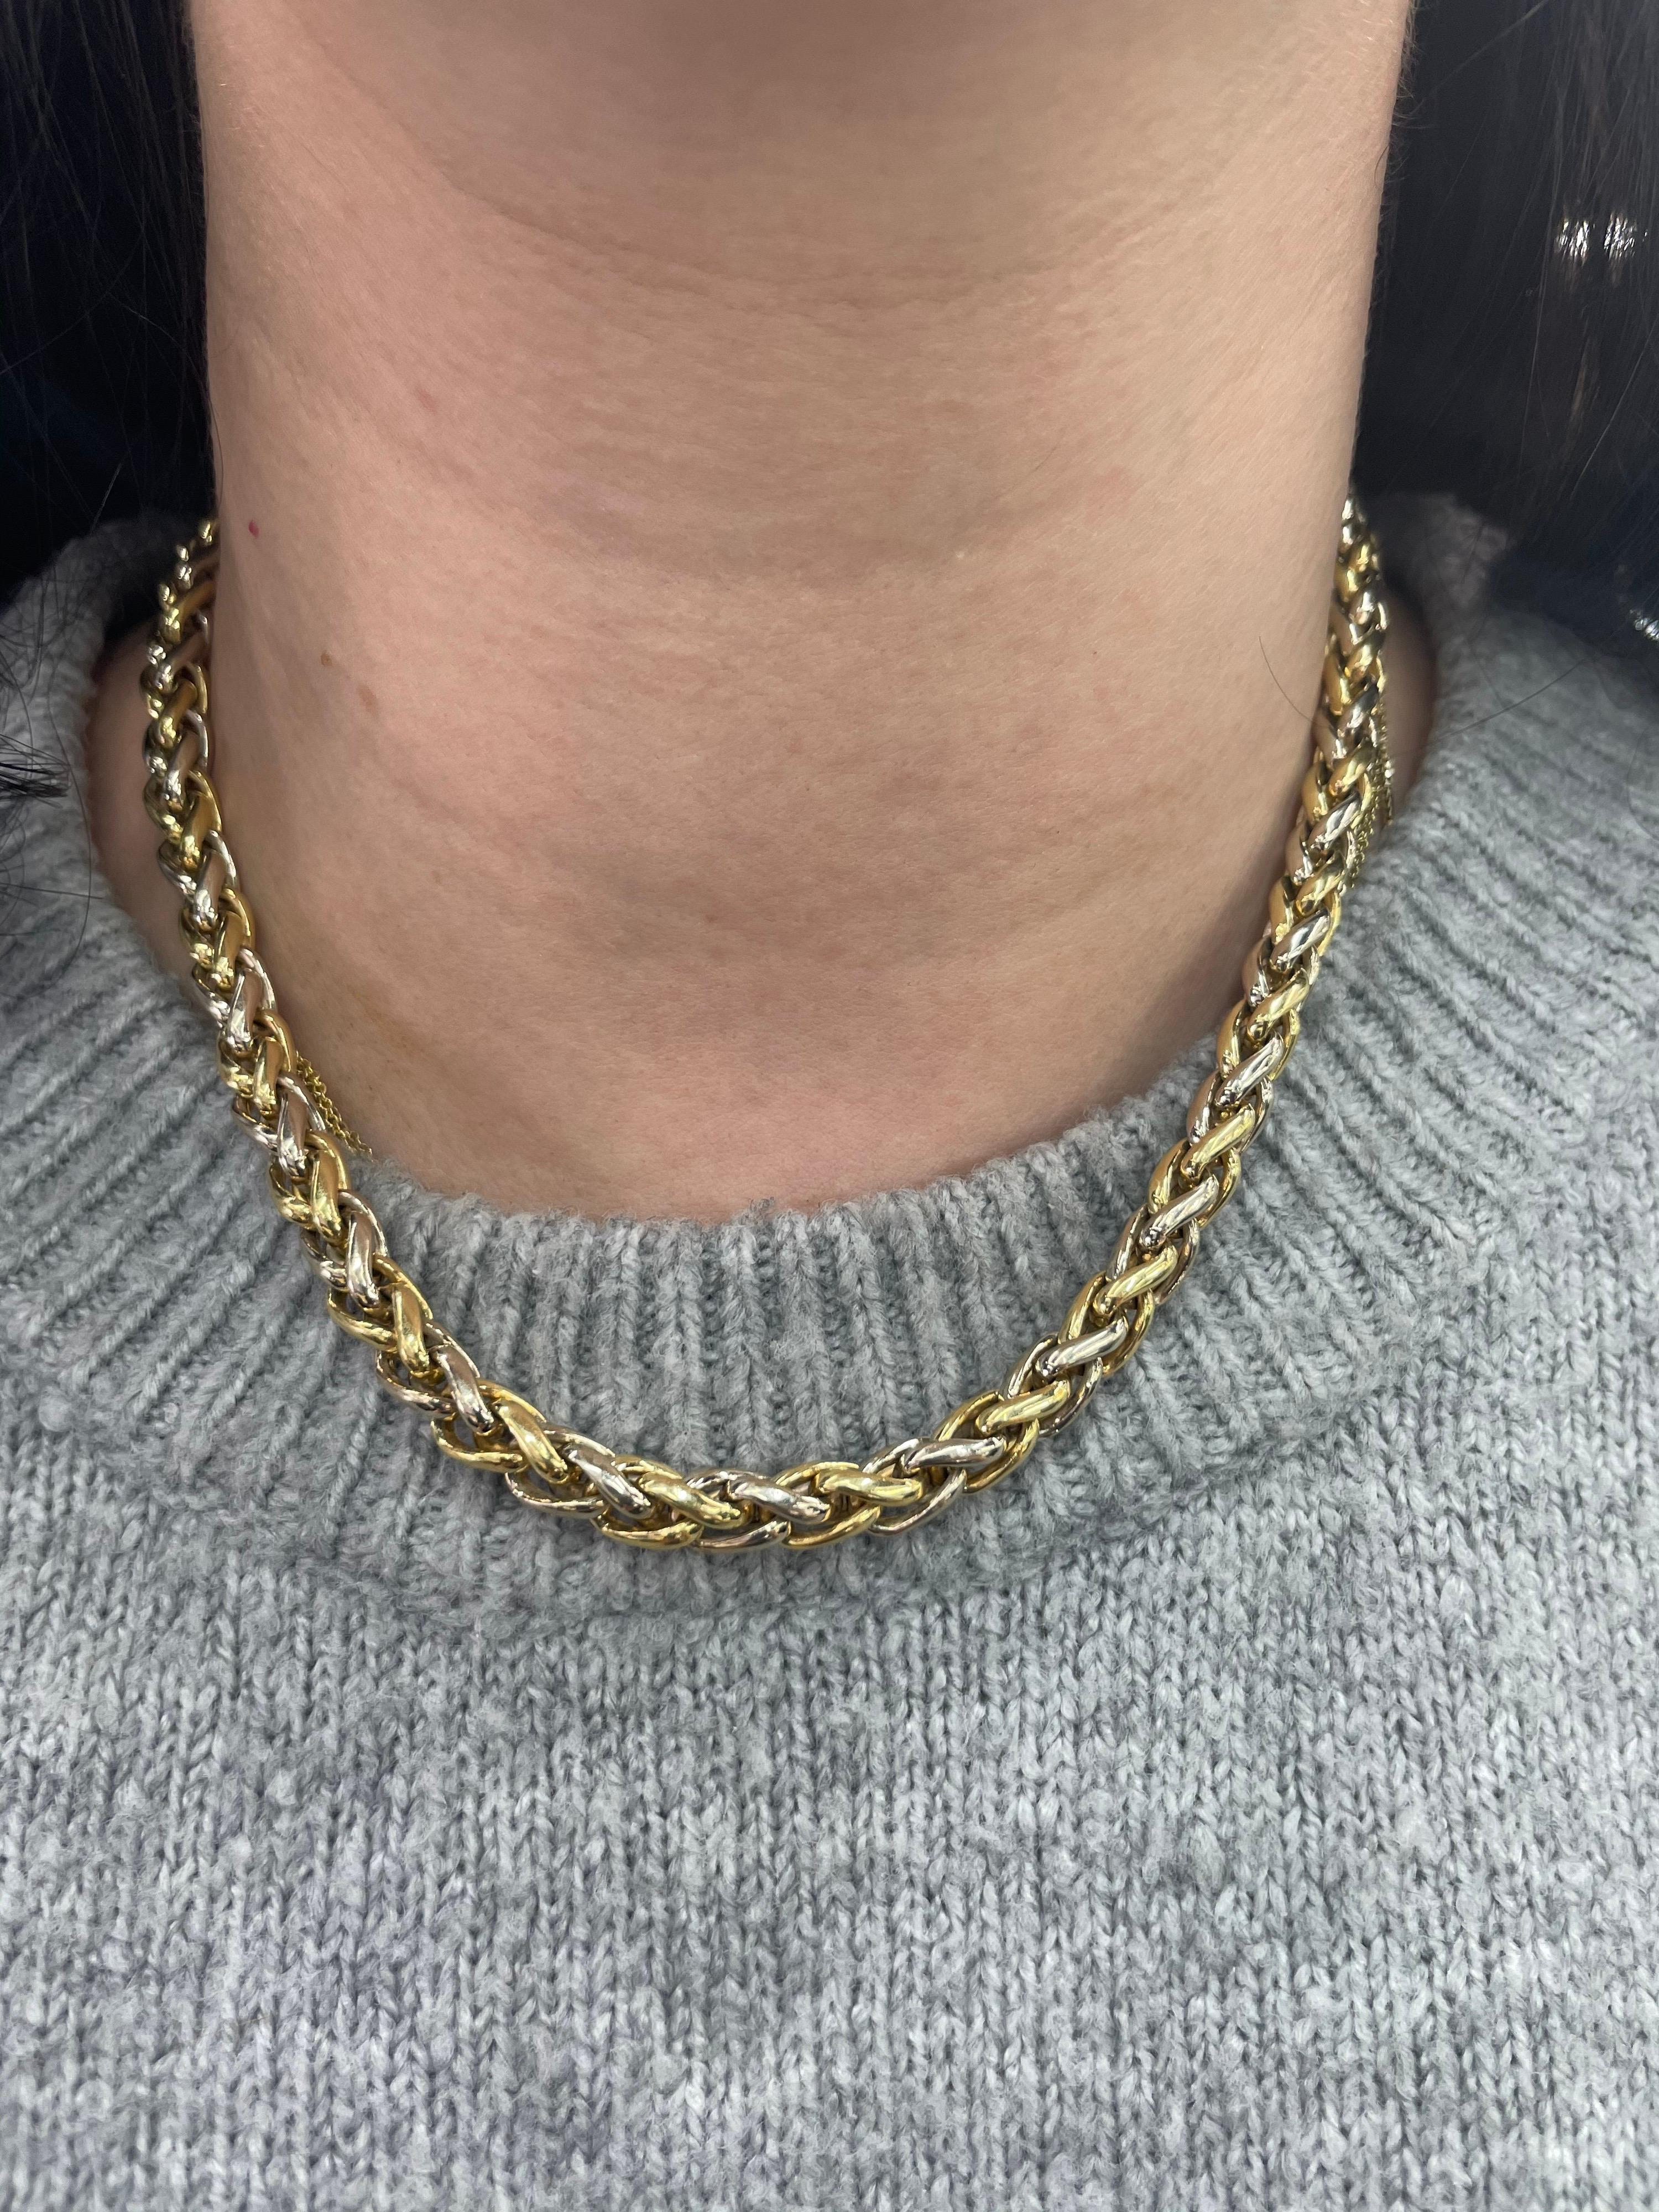 Vintage necklace featuring 14 Karat Yellow & White gold braided motif style.
16.75 Inches Long
More gold necklaces in stock. 
Email for more pictures & styles